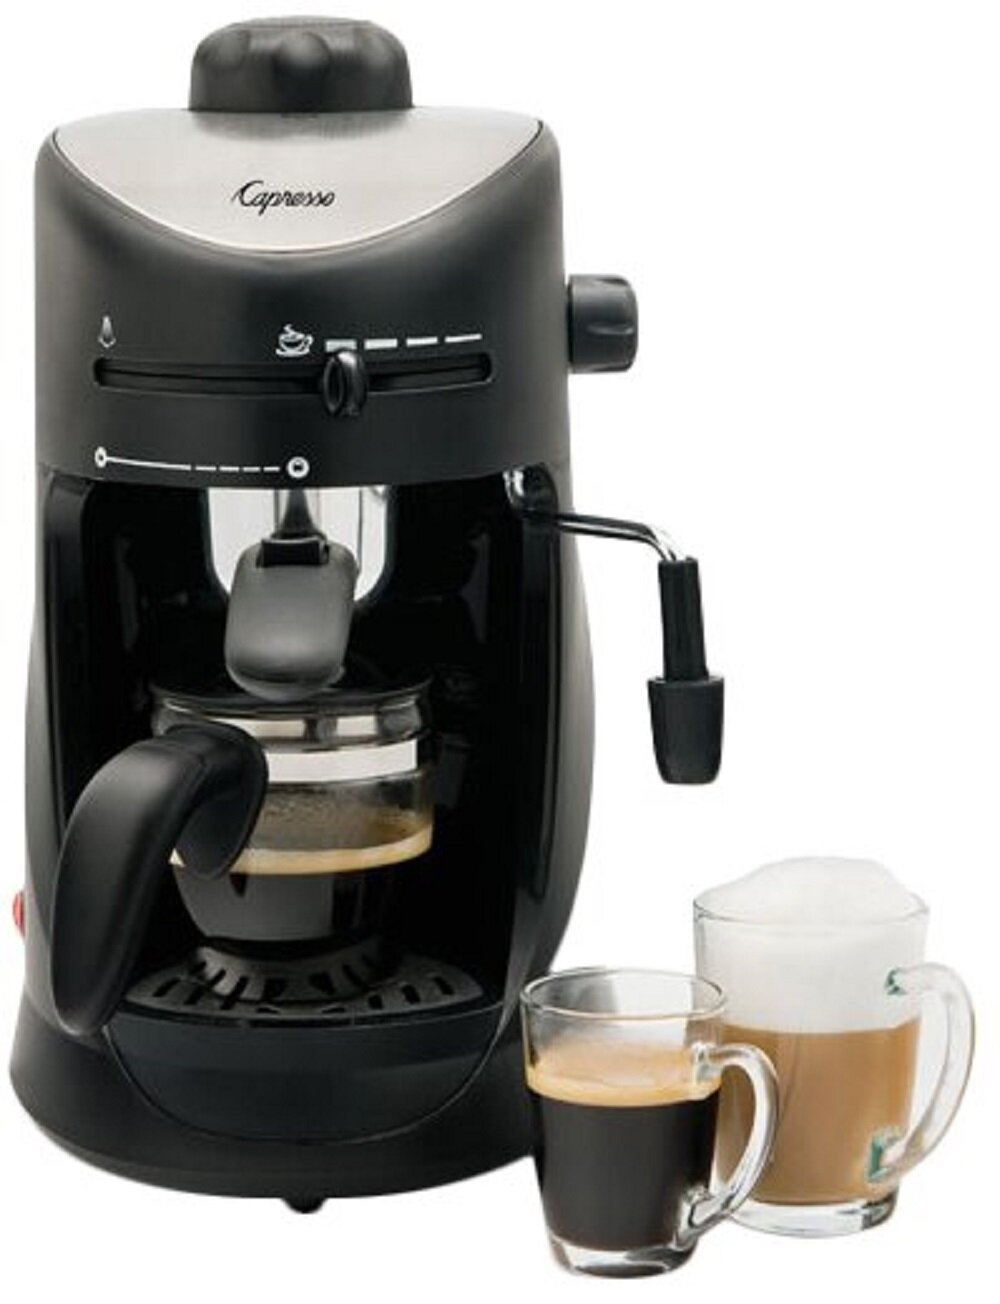 Mr. Coffee 4-Cup Steam Espresso and Cappuccino Maker Stainless